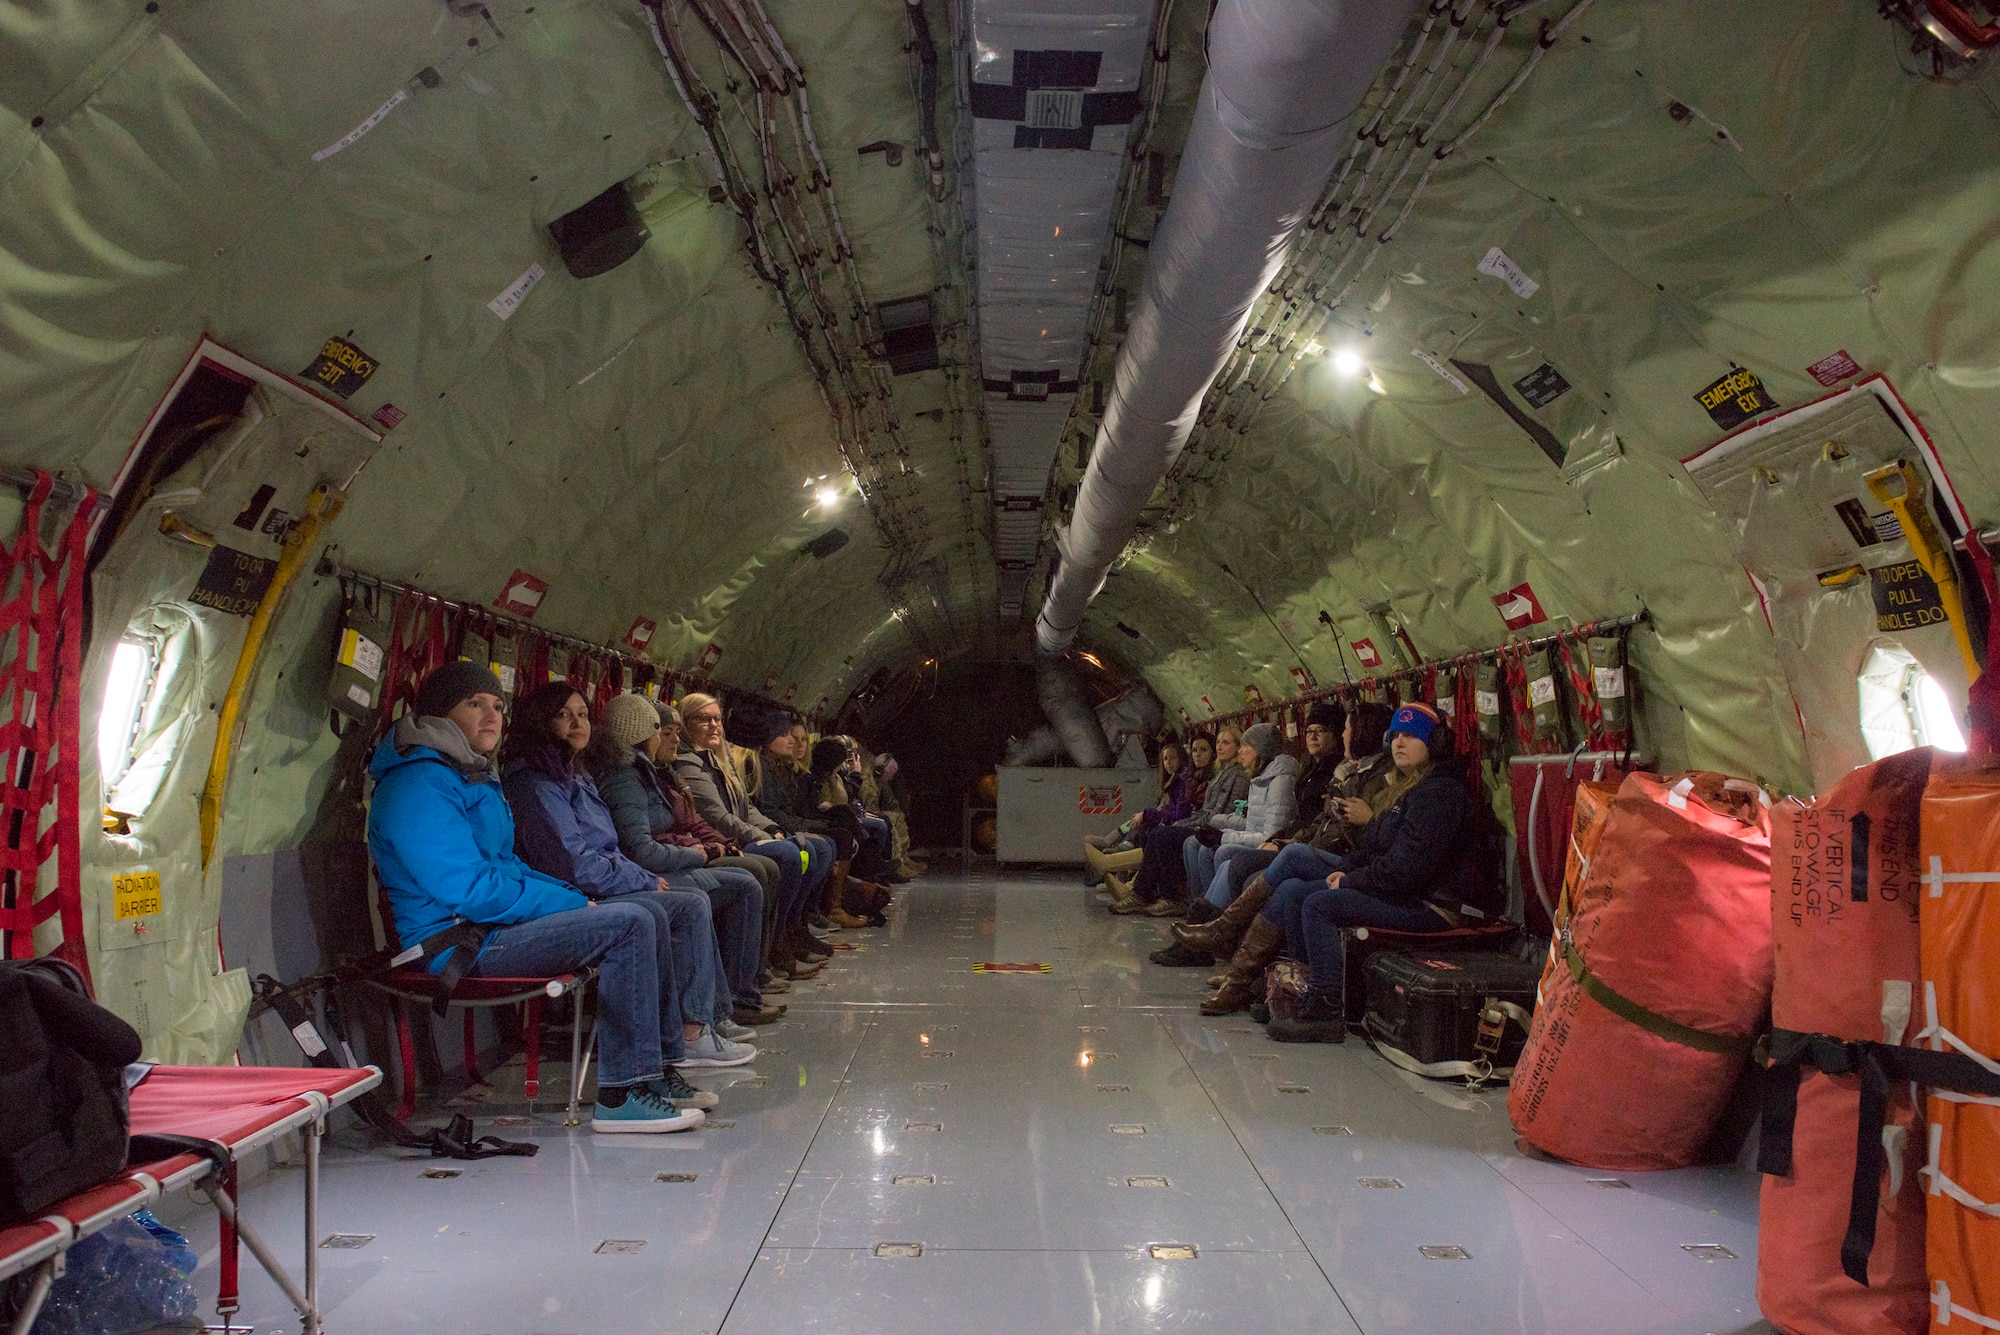 Spouses of Airmen from the 124th Fighter Wing await takeoff on a KC-135 Stratotanker assigned to the Utah Air National Guard’s 151st Air Refueling Wing, at Gowen Field, Dec. 7, 2019. The Idaho and Utah Air National Guard units collaborated to support an in-flight refueling experience for spouses of Airmen from the 124th FW. (U.S. Air National Guard photo by Airman 1st Class Taylor Walker)